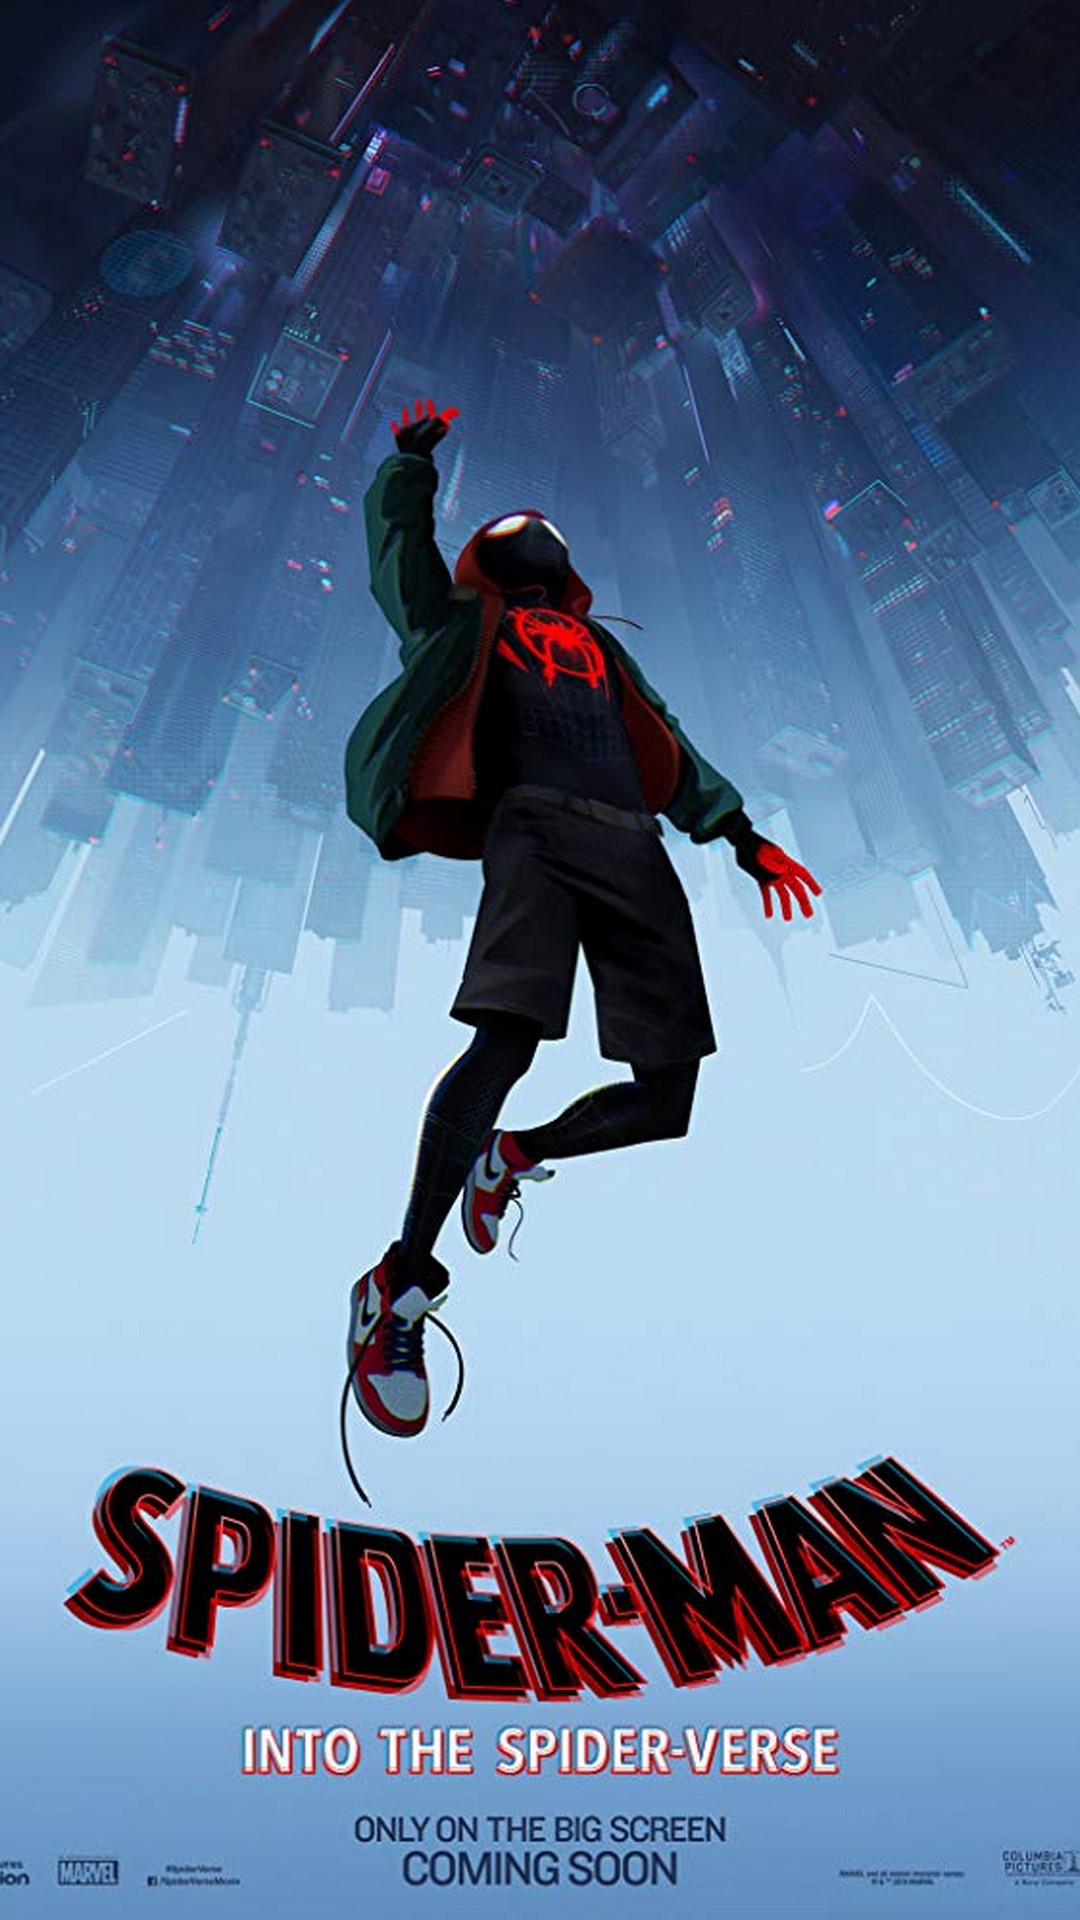 Spider-Man Into the Spider-Verse iPhone Wallpaper with image resolution 1080x1920 pixel. You can make this wallpaper for your iPhone 5, 6, 7, 8, X backgrounds, Mobile Screensaver, or iPad Lock Screen